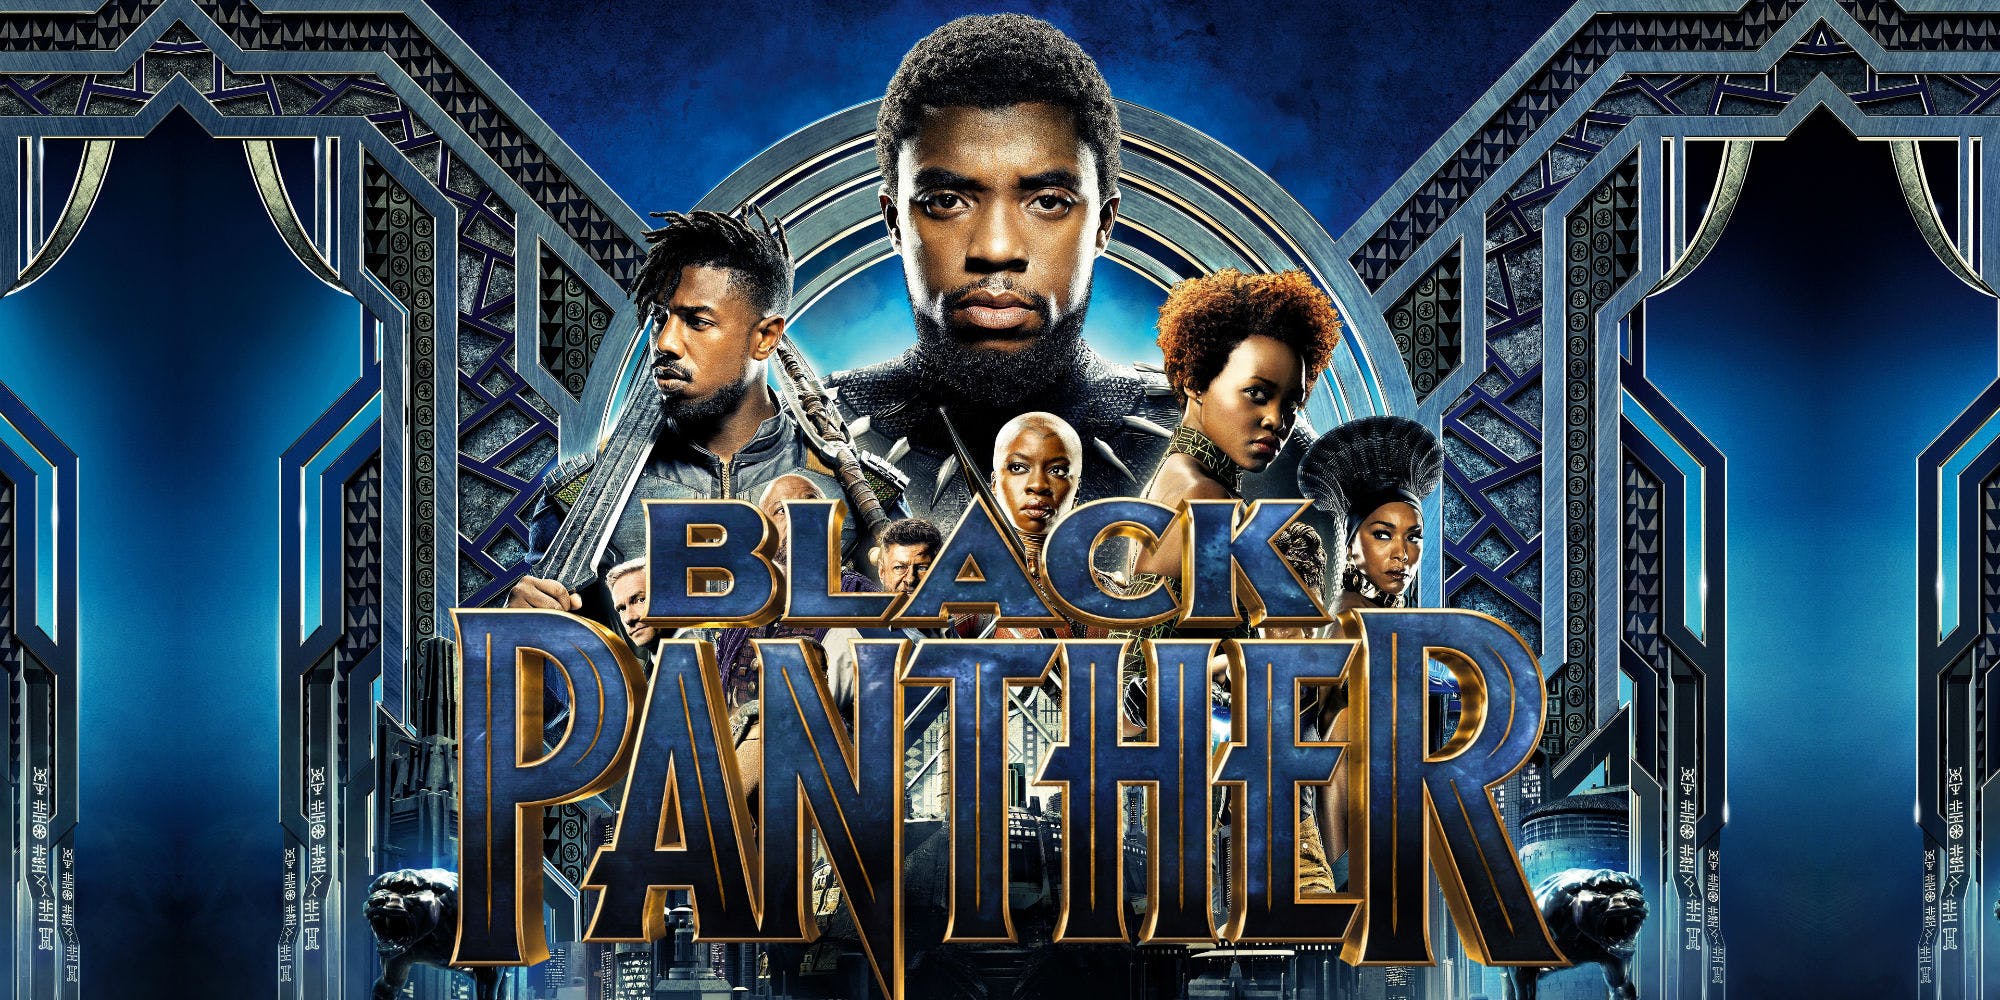 Review: Black Panther’s Box Office Success Is Well Earned | Samuel R